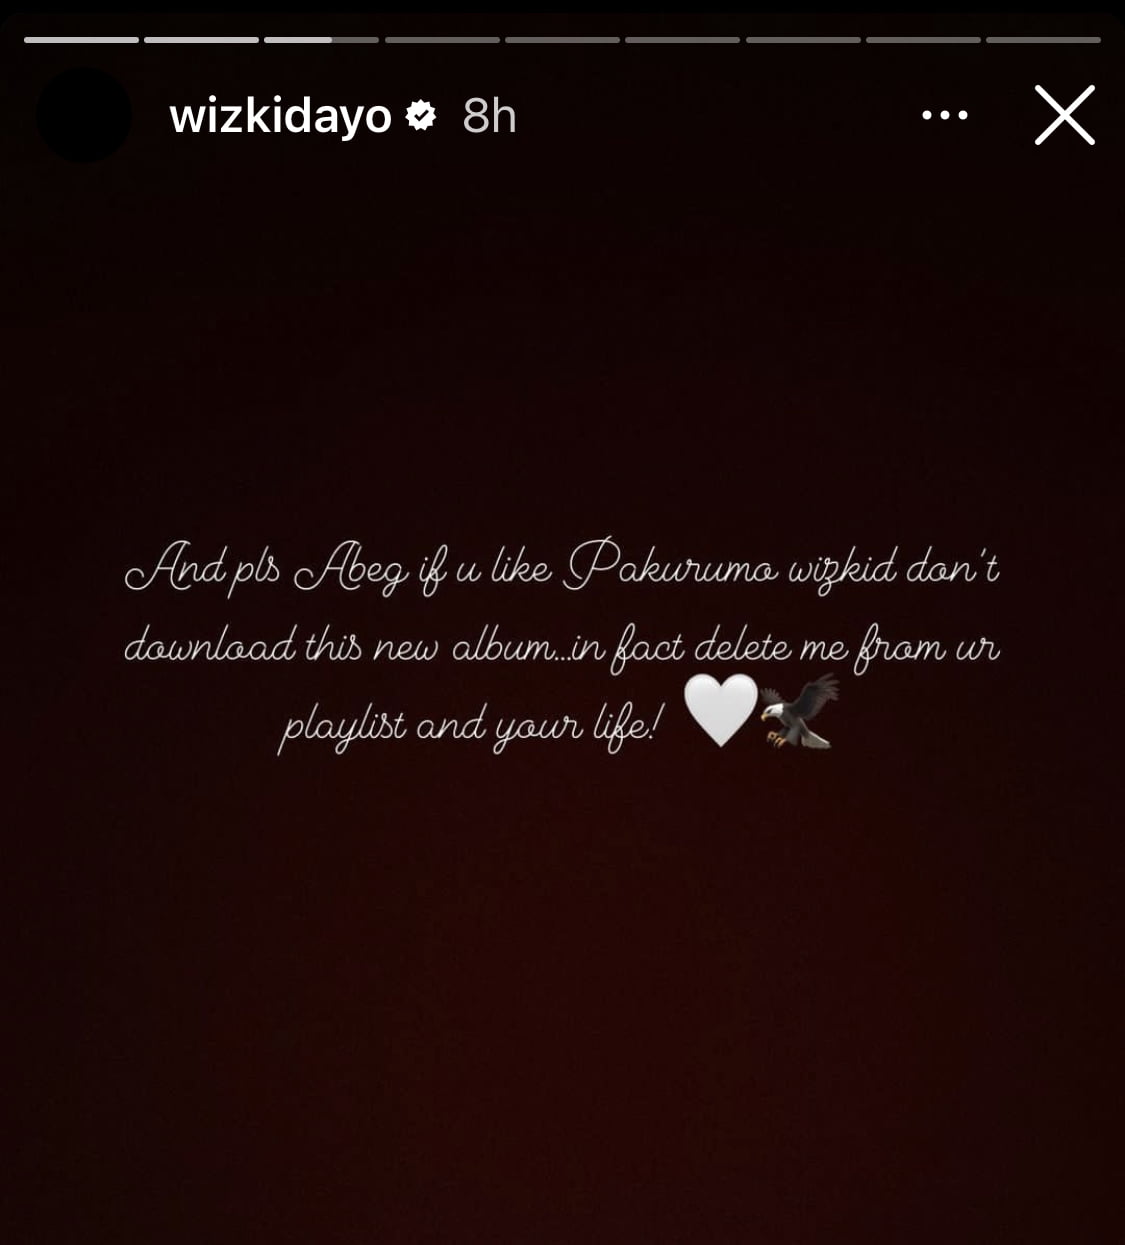 Wizkid cautions fans who are stuck on his old style of music to not download his upcoming album.